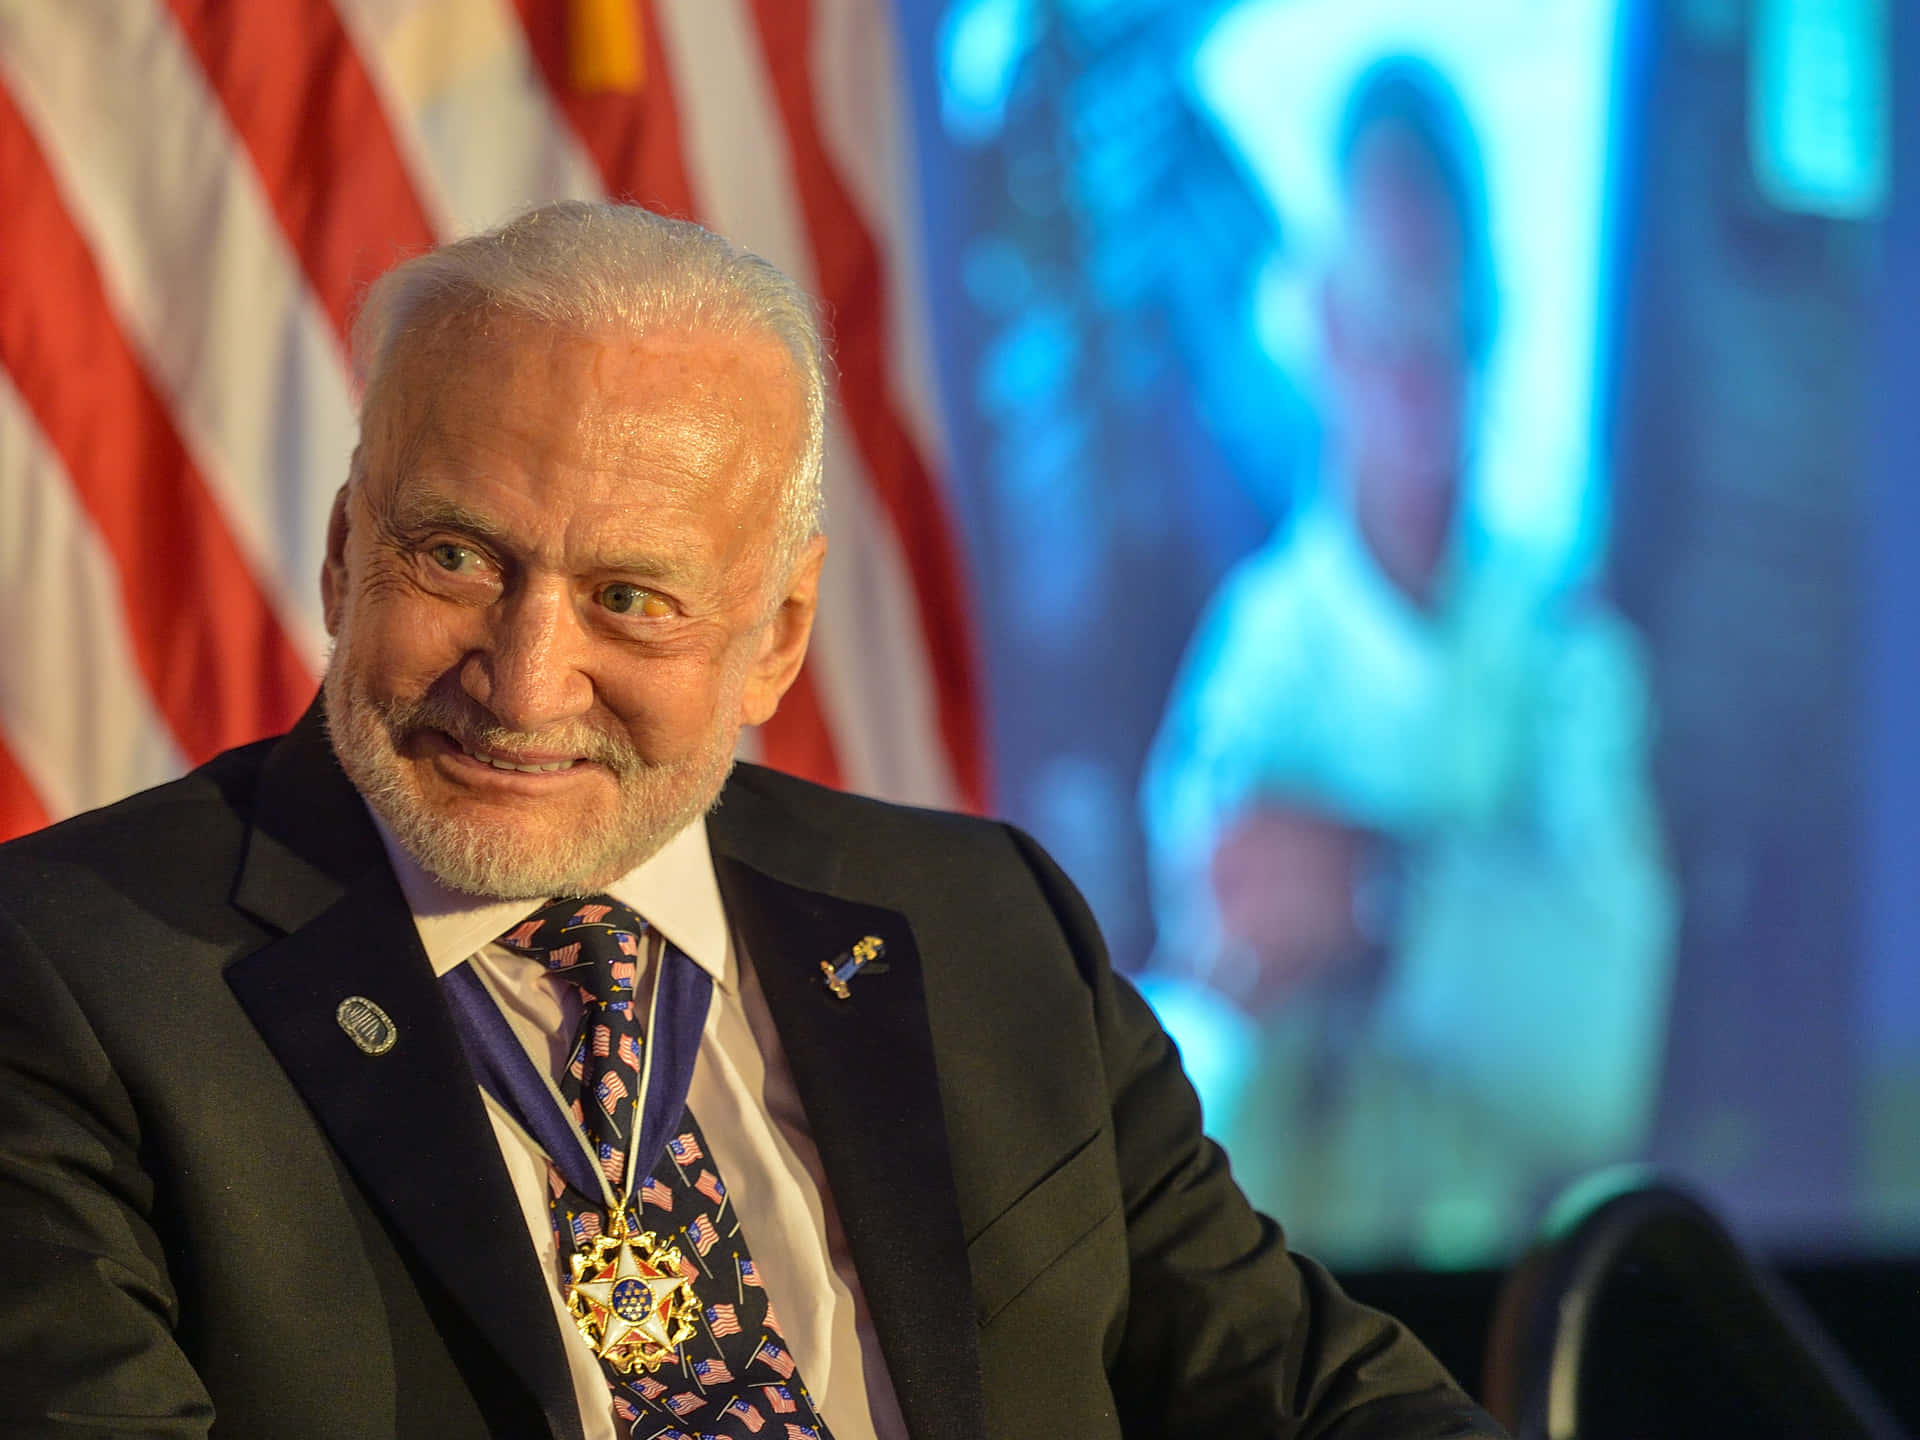 Buzz Aldrin Smilingwith Medals Wallpaper